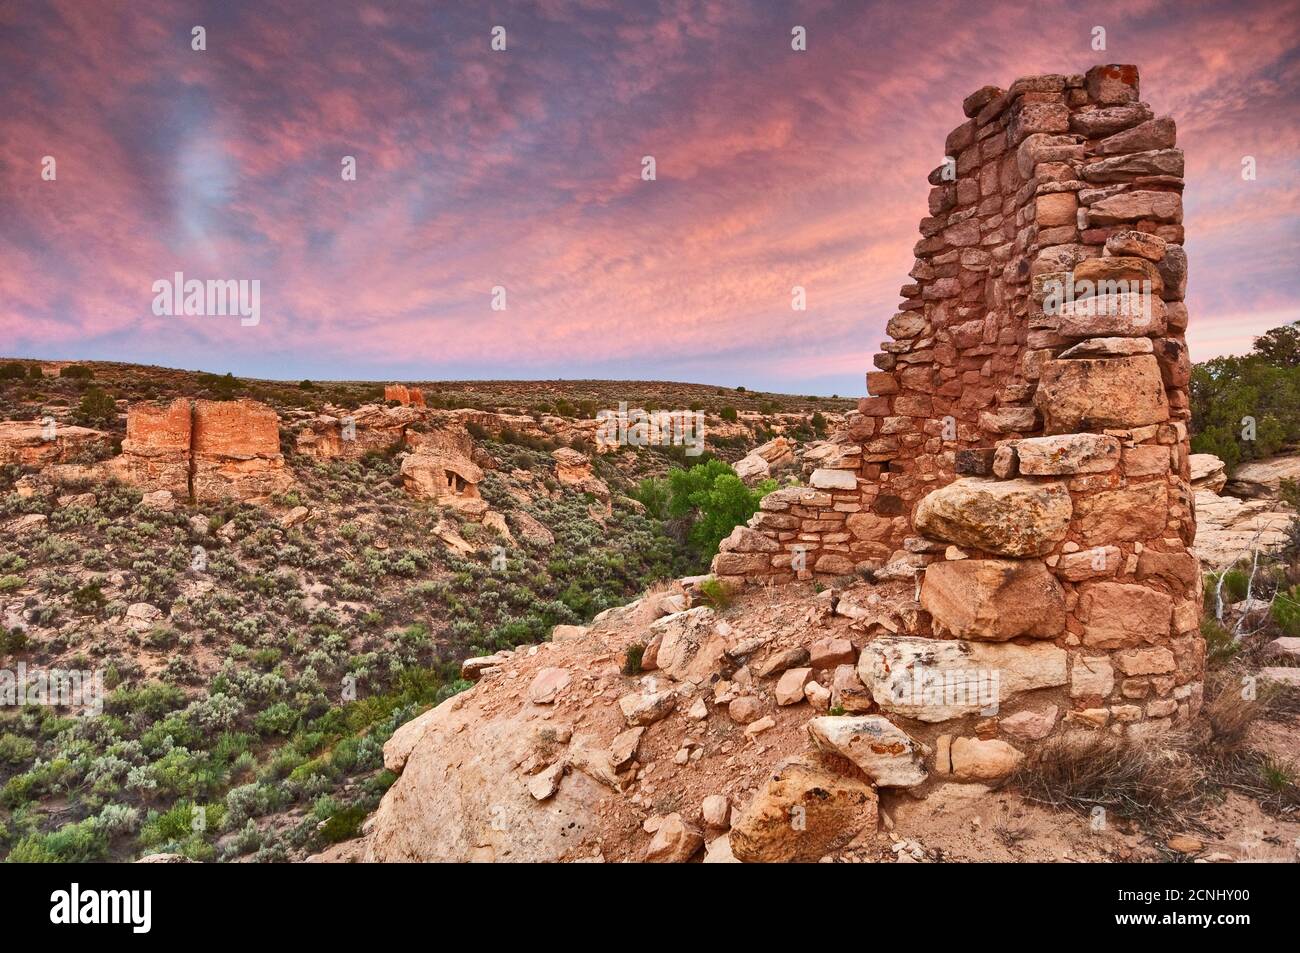 Eroded Boulder House, with Twin Towers and Rim Rock House in distance, at sunrise, Hovenweep National Monument, Colorado Plateau, Utah, USA Stock Photo